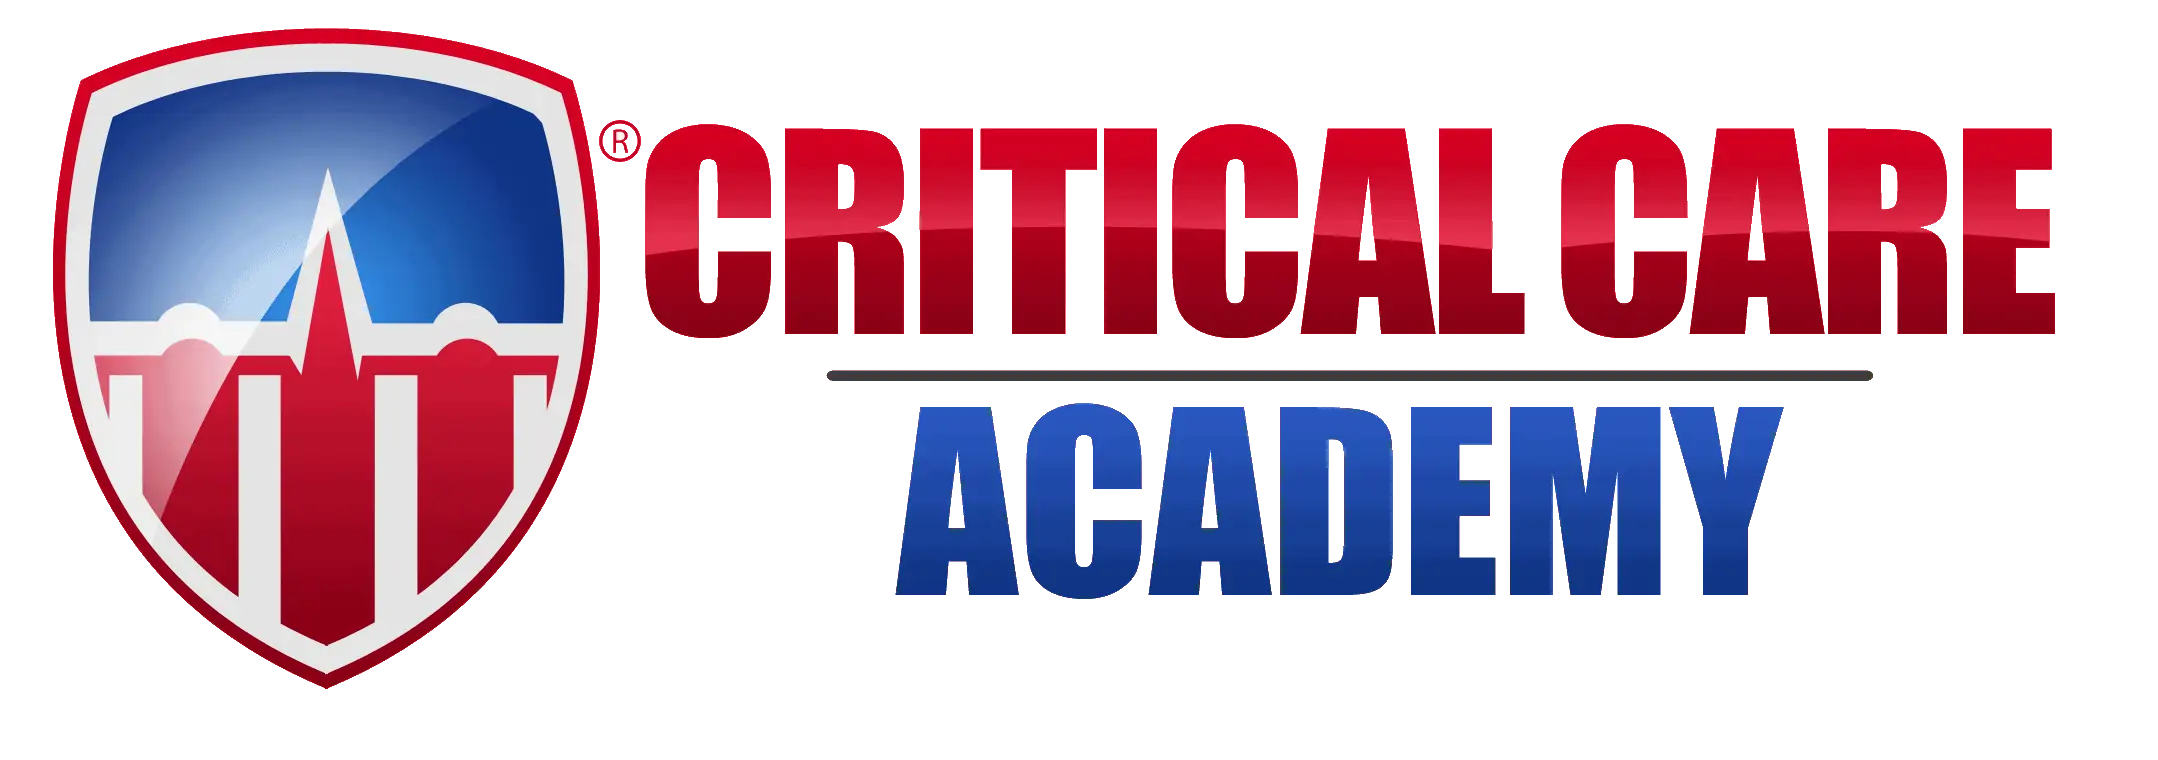 Critical Care Academy - CCRN Certification Review Courses Online